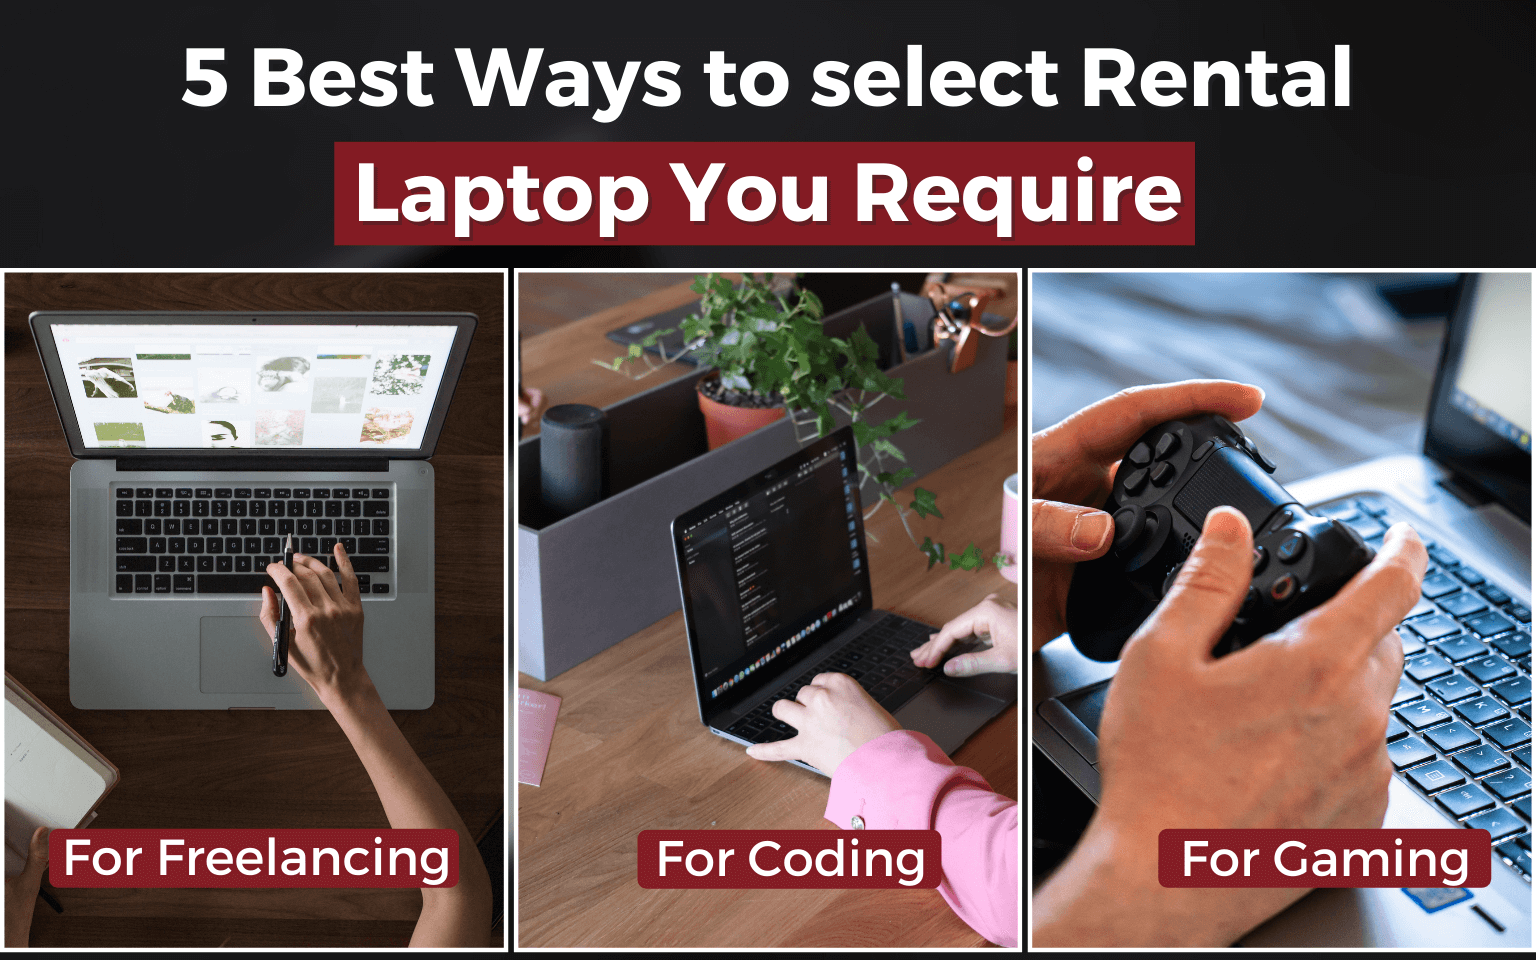 5 Best Ways to select Rental Laptop You Require